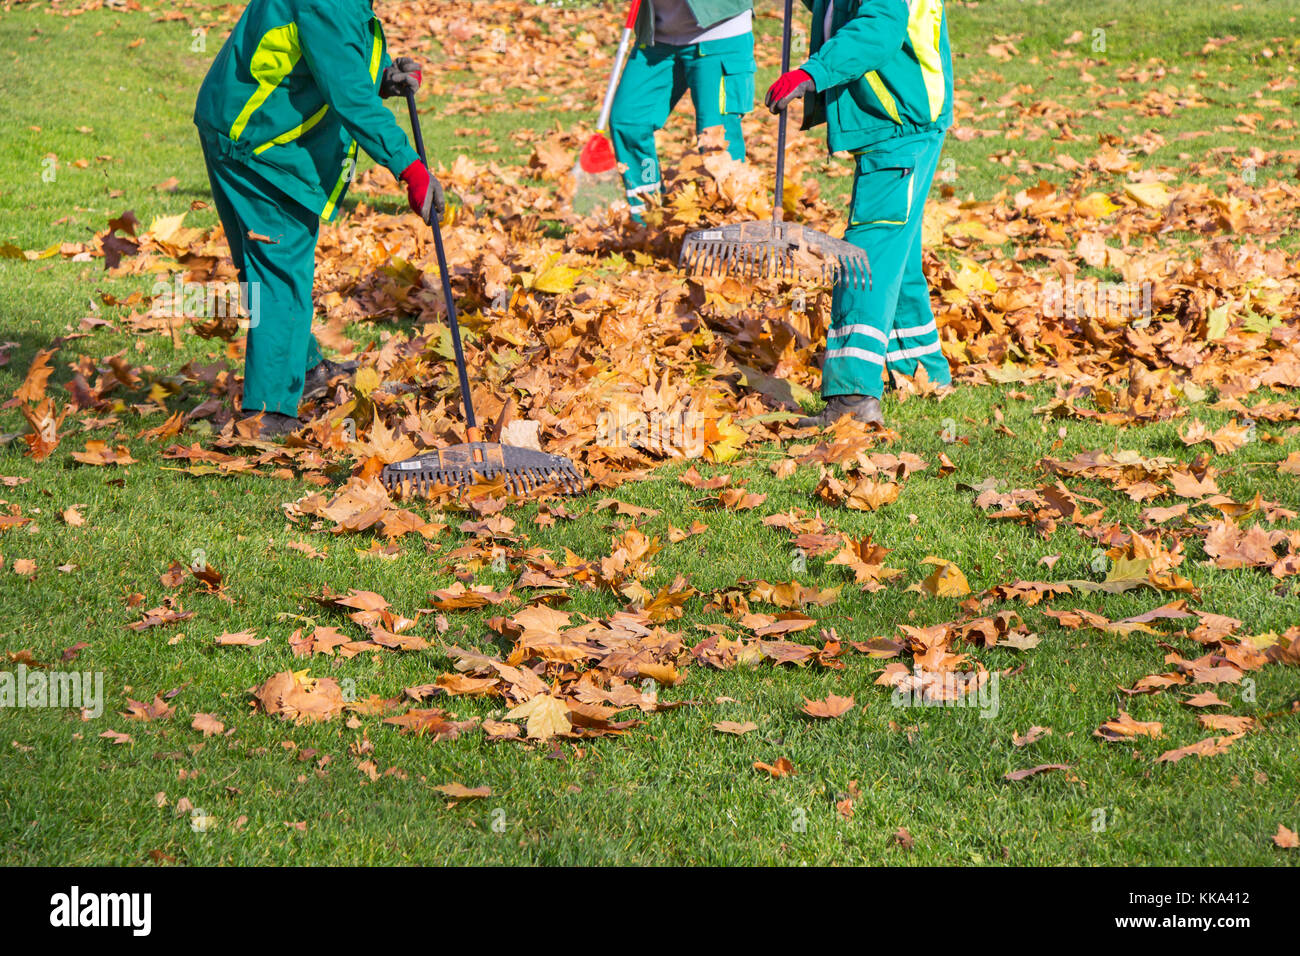 Workers cleaning fallen autumn leaves Stock Photo